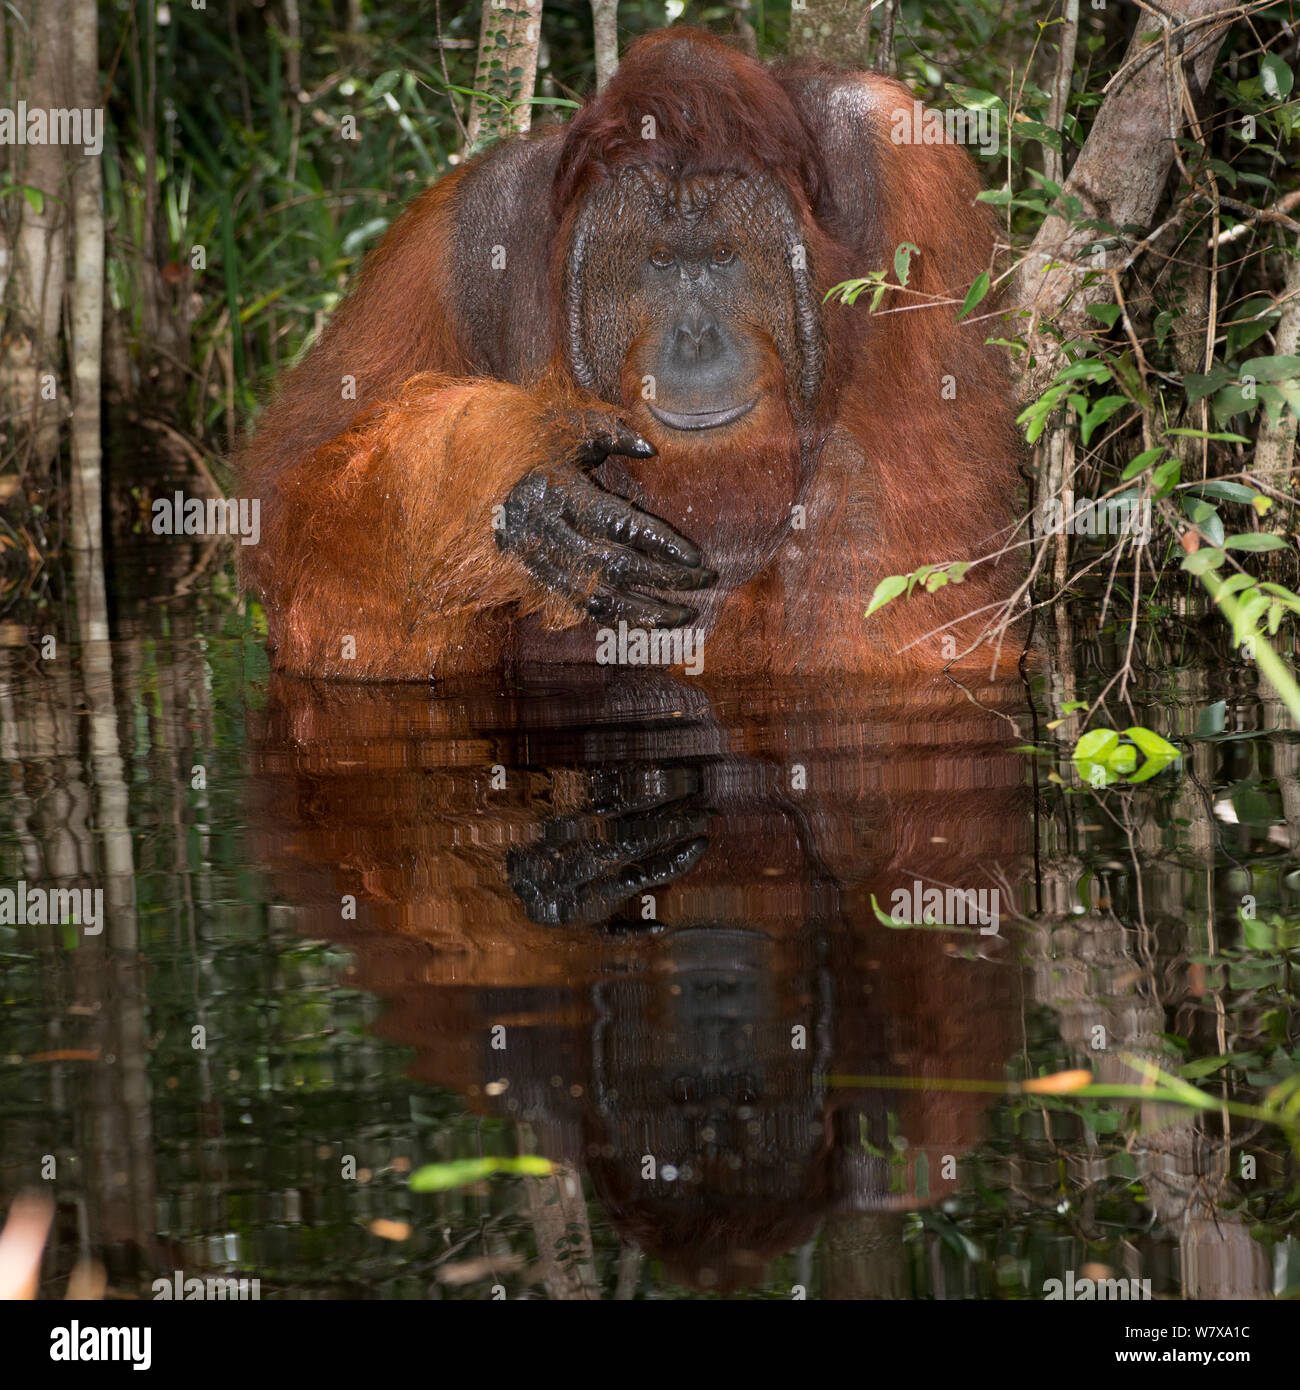 Bornean Orangutan (Pongo pygmaeus) male sitting in water about to drink, Camp Leakey, Tanjung Puting National Park, Central Kalimantan, Borneo, Indonesia. Sequence 1 of 2. Stock Photo